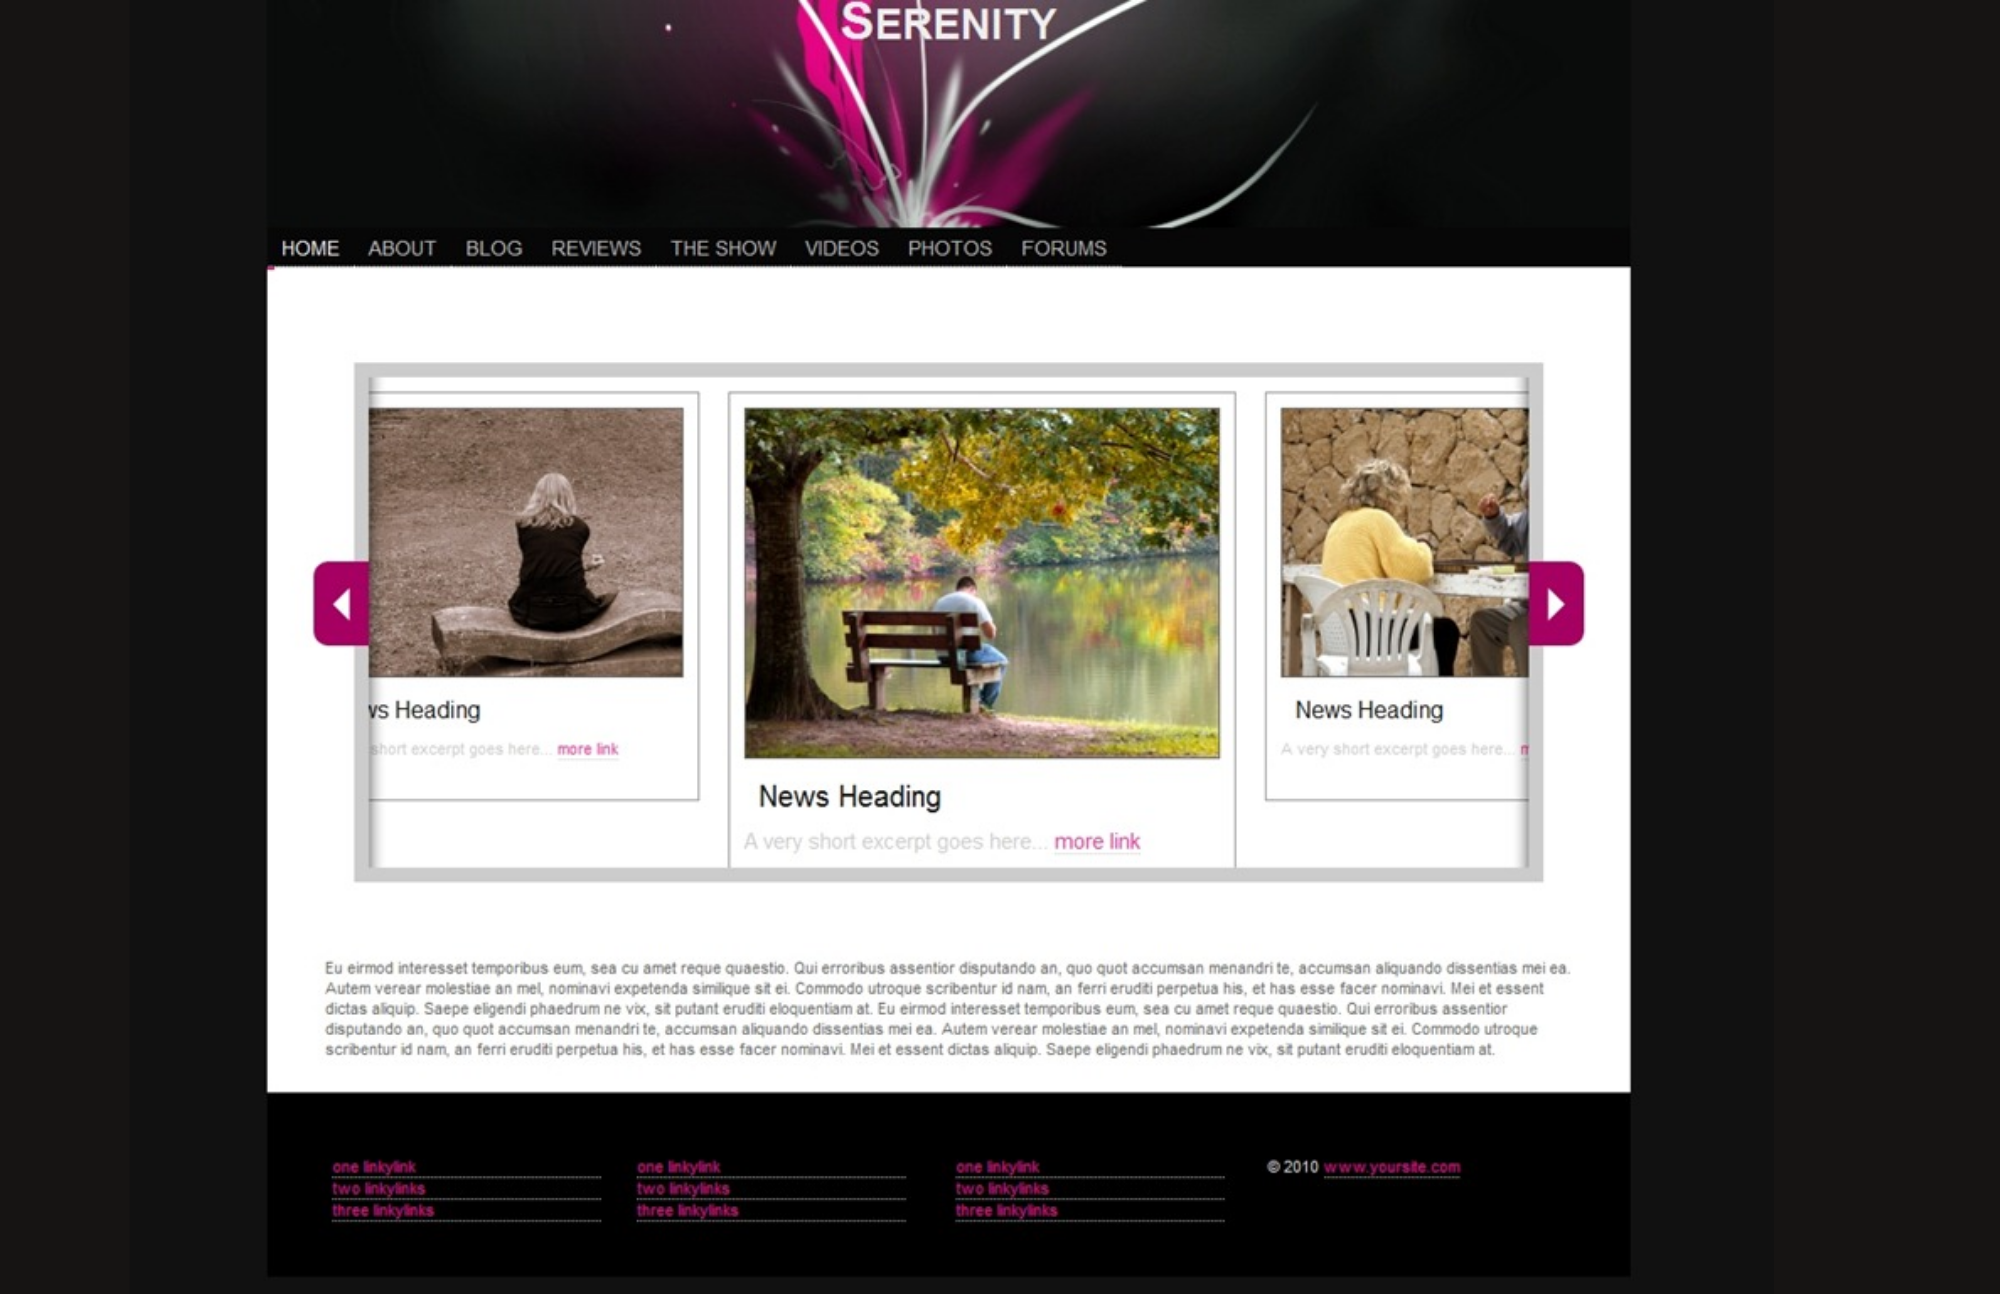 Serenity's HTML5 and CSS3 website, as well as the information provided below